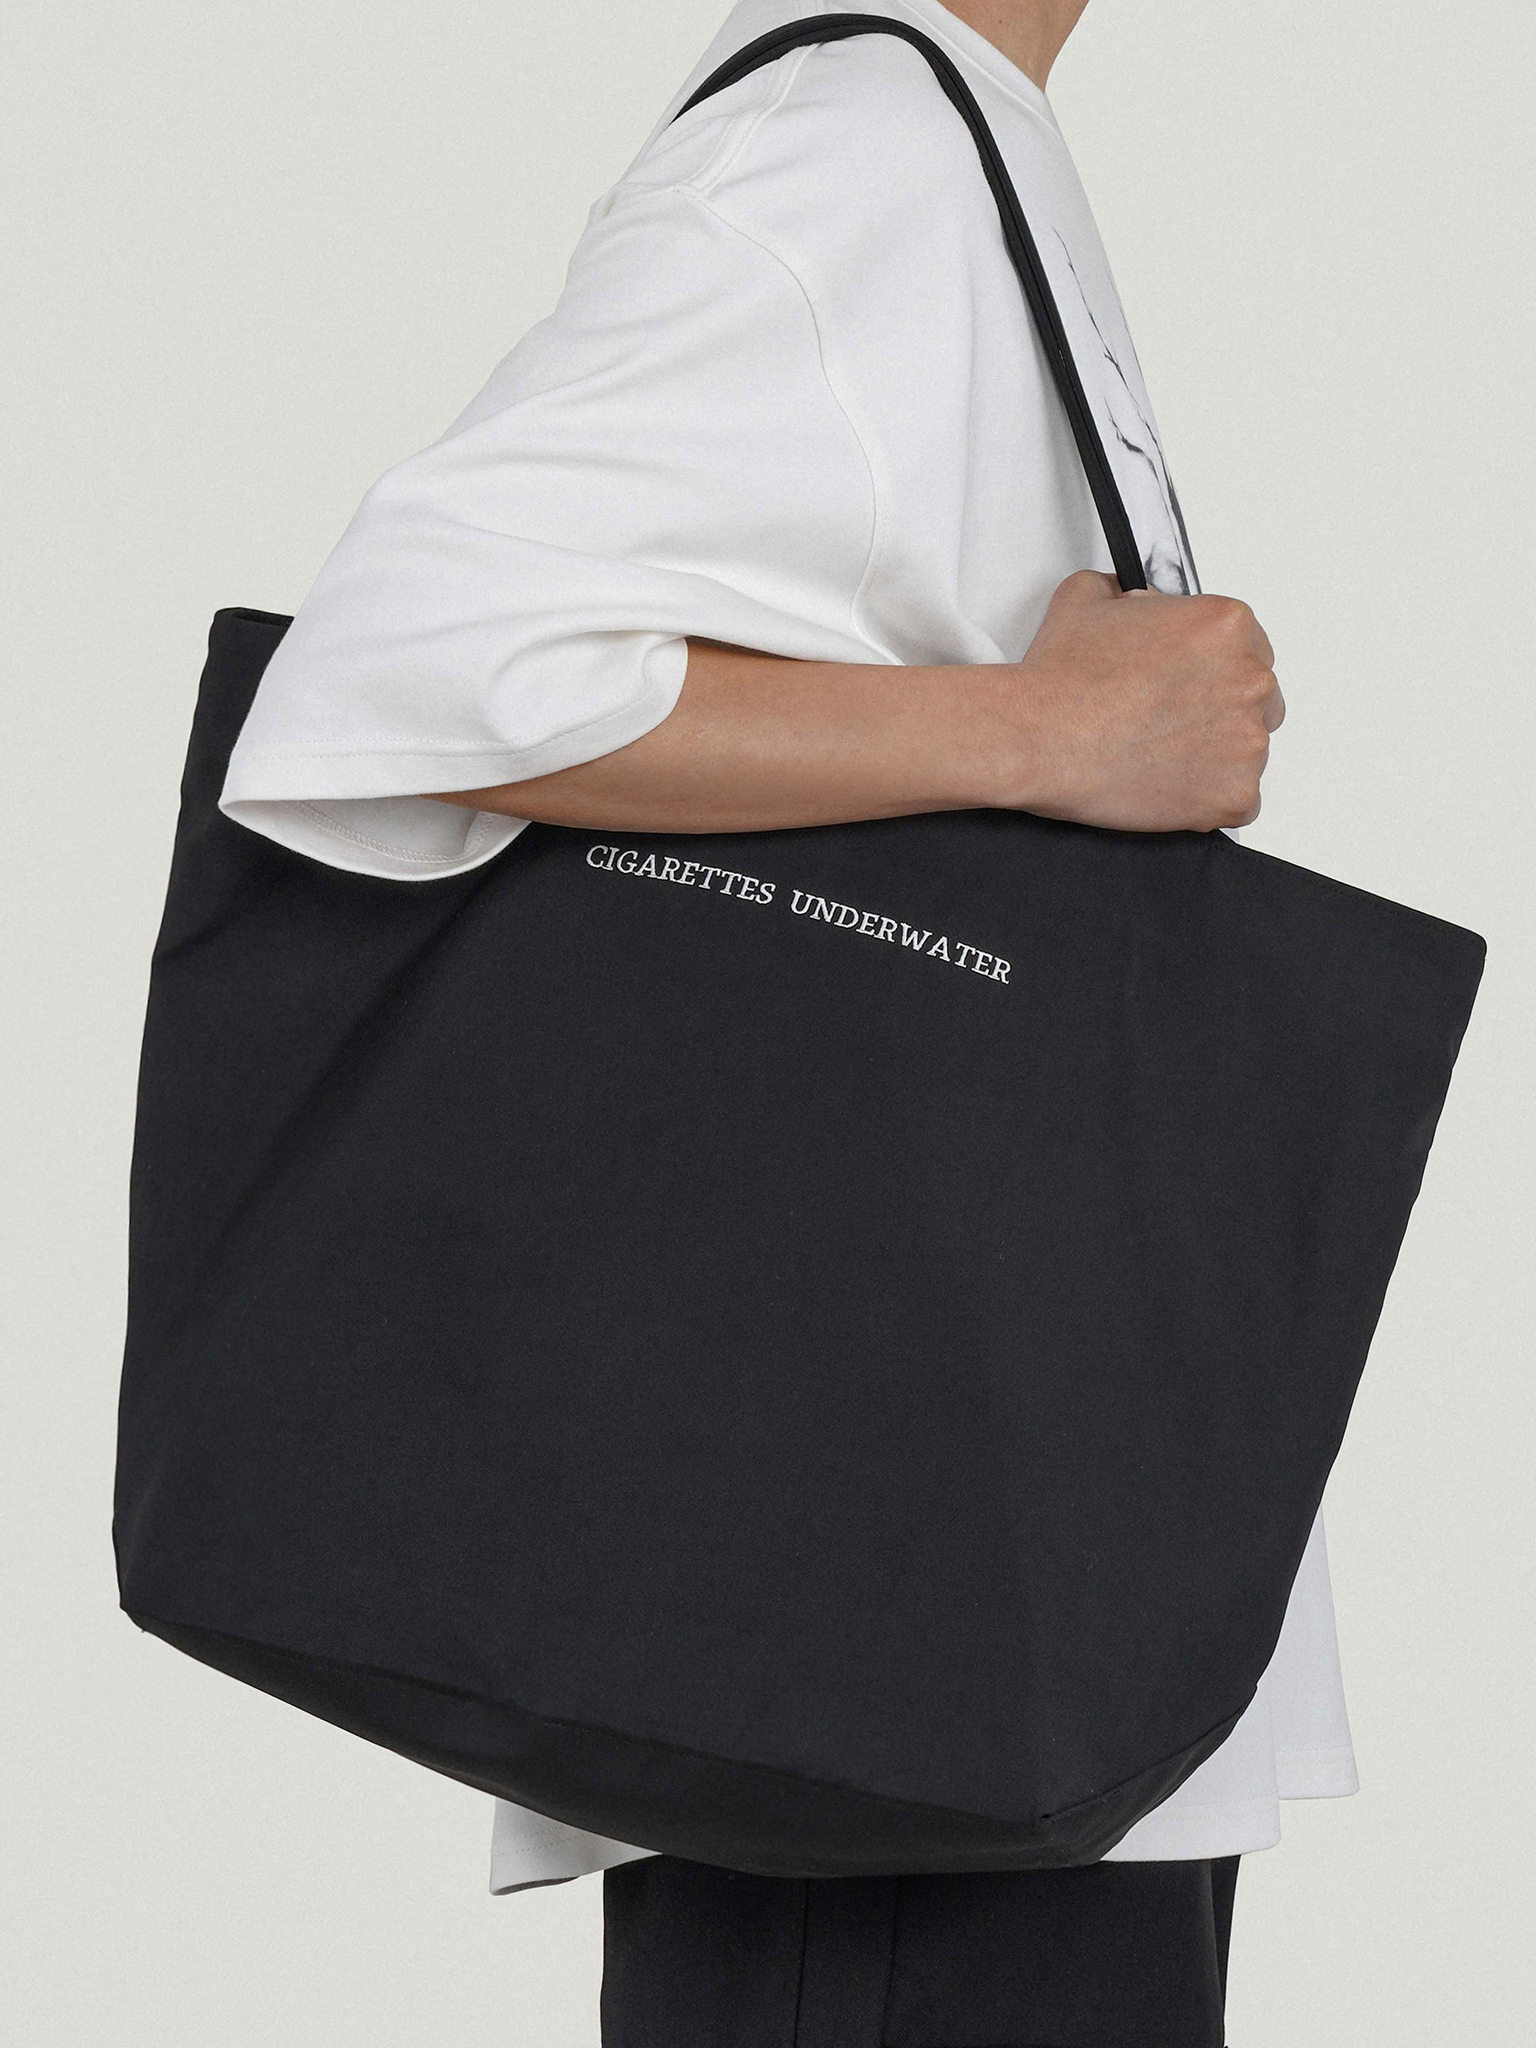 UNDERWATER SS22 CIGARETTES TOTE BAG